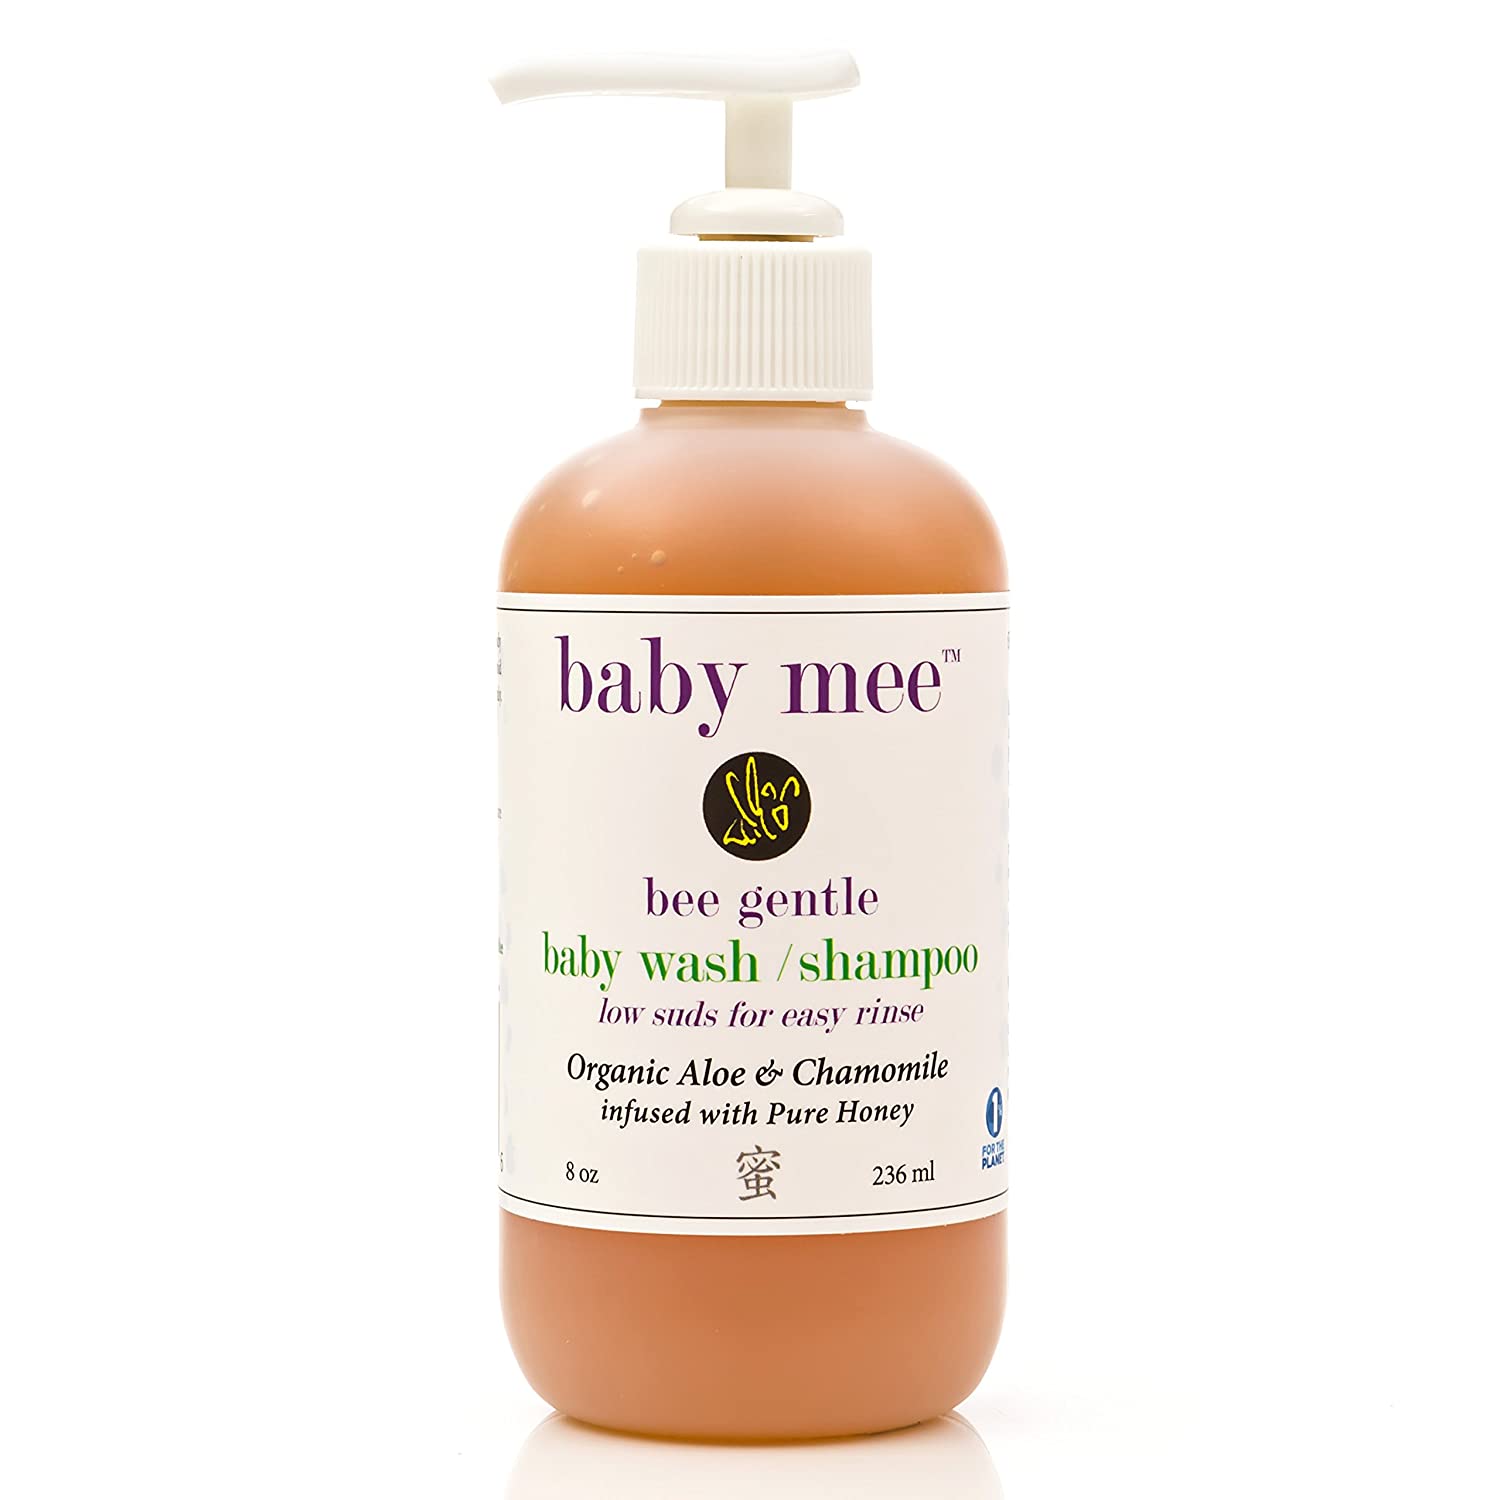 Top 13 Best Organic Baby Washes 2022 - Review & Buying Guide 10